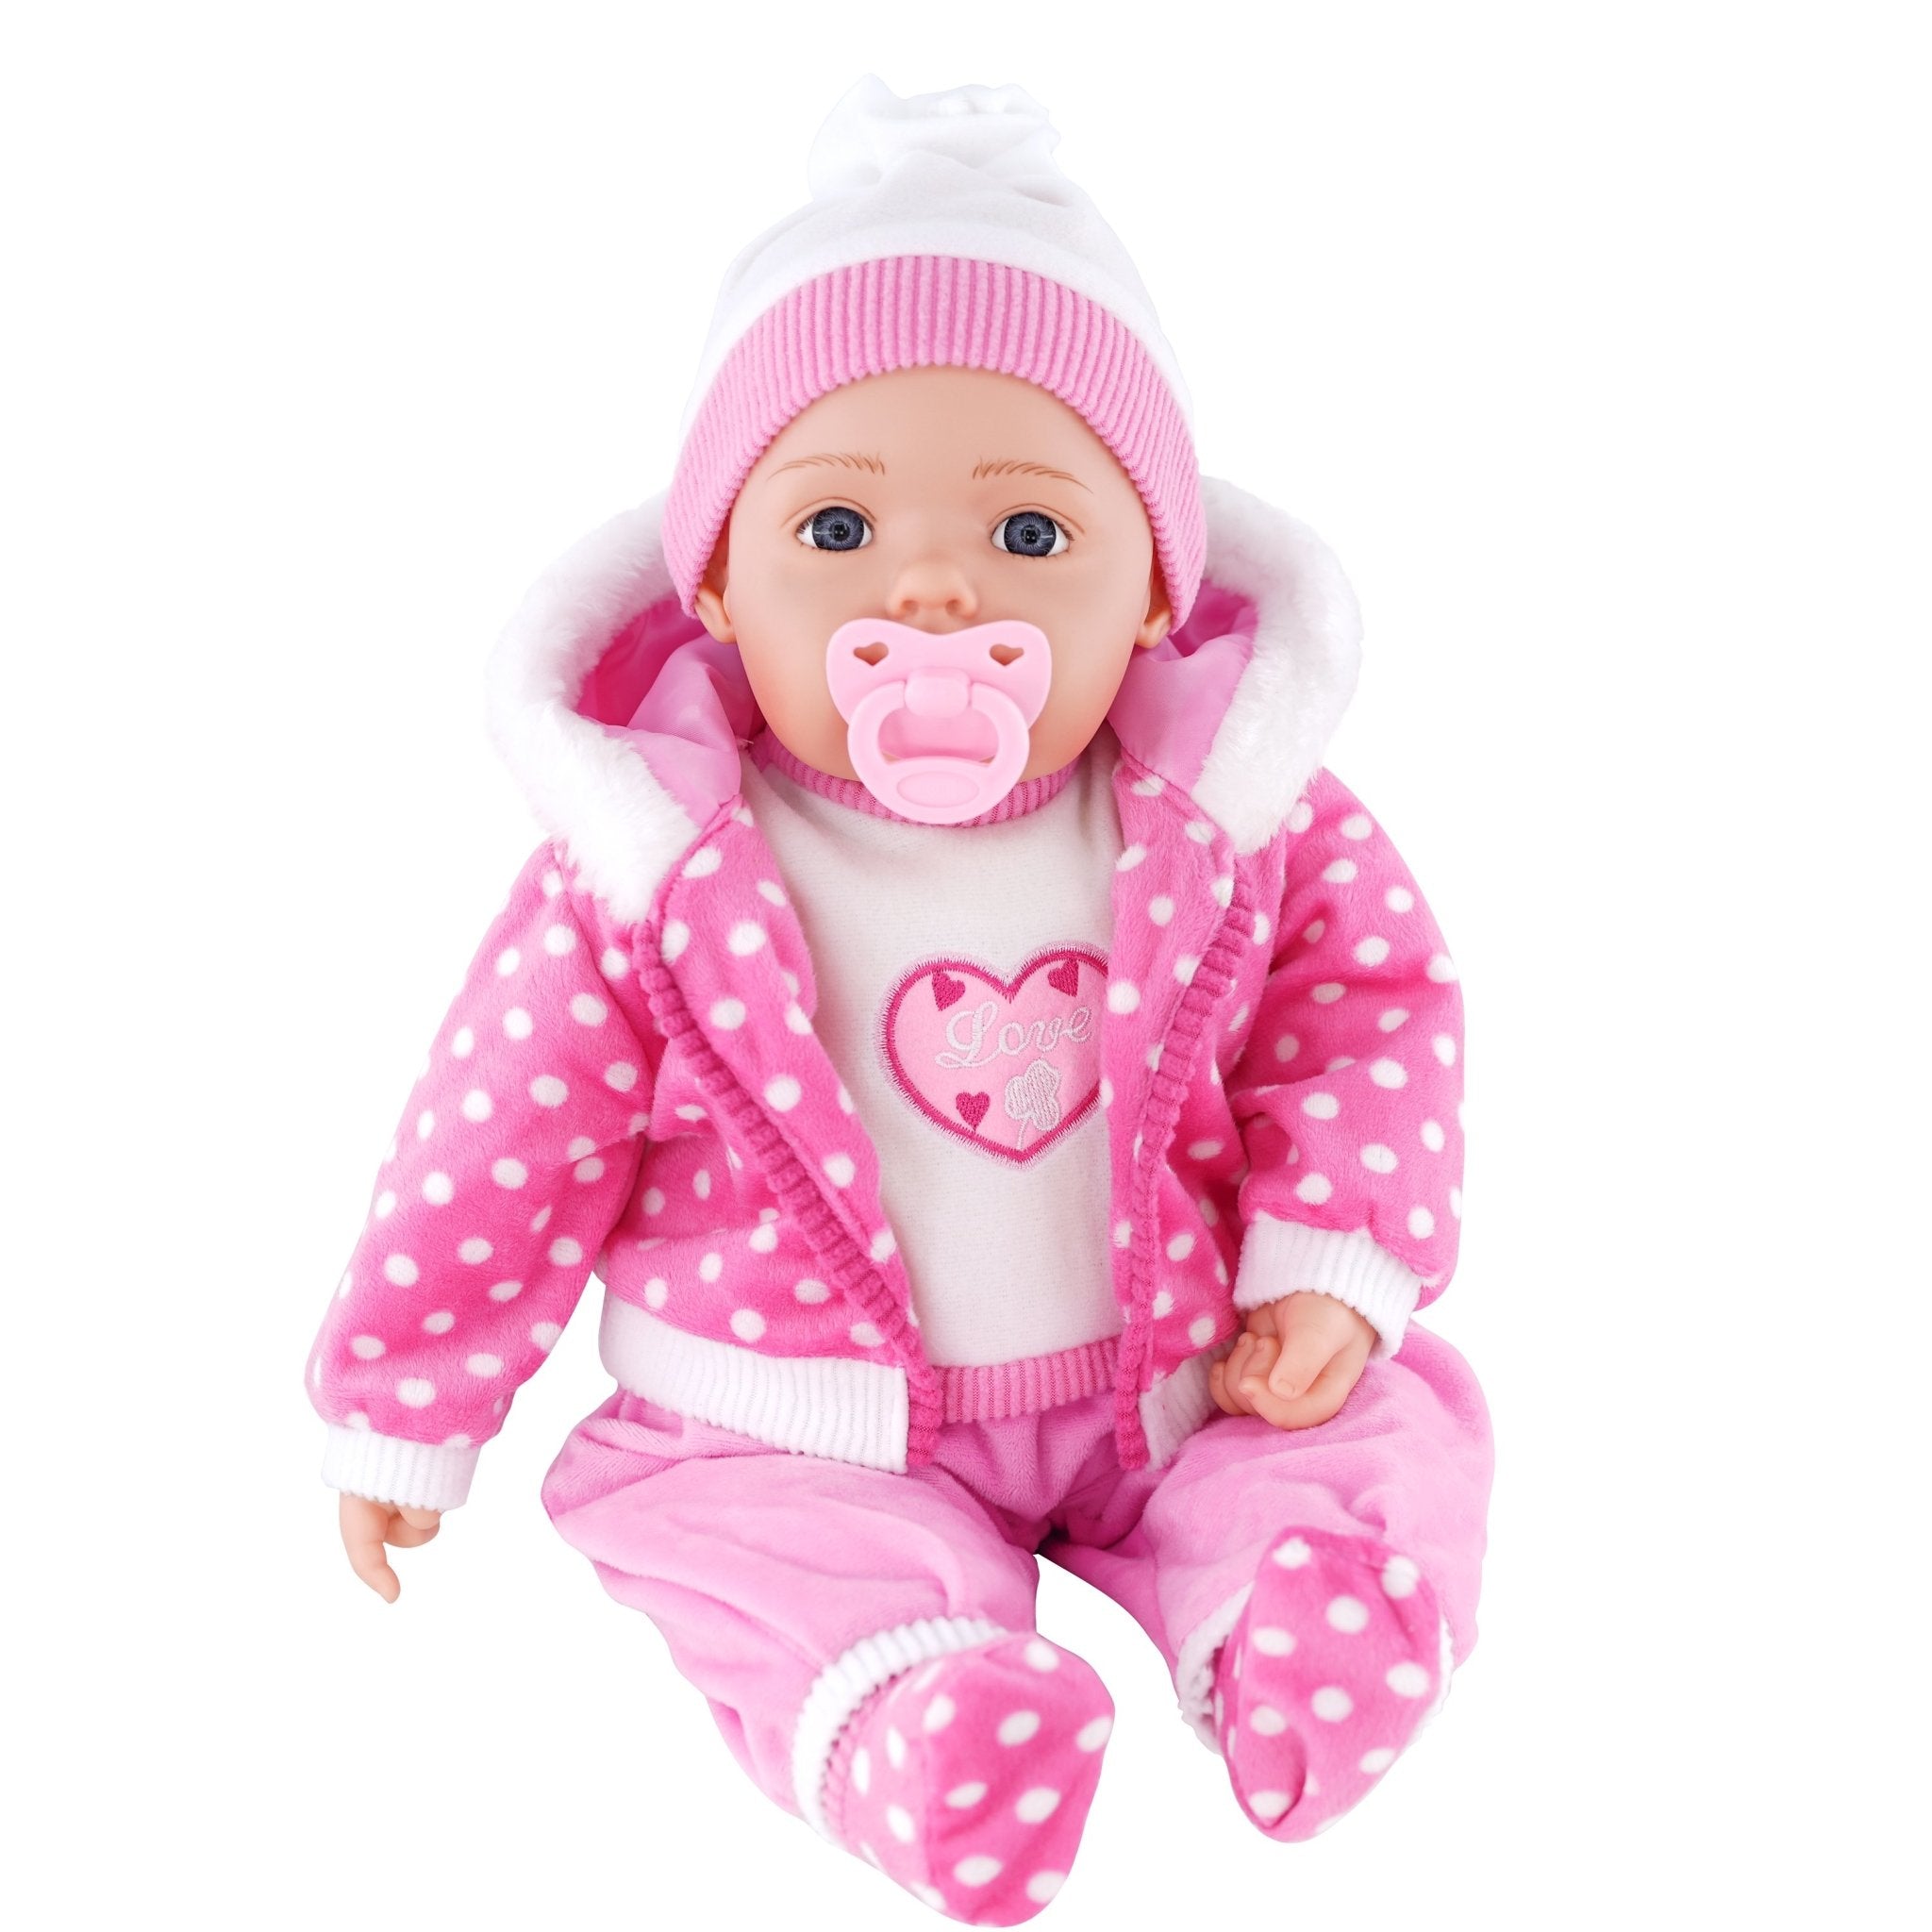 Candy Pink Bibi Baby Doll Toy With Dummy & Sounds BiBi Doll - The Magic Toy Shop